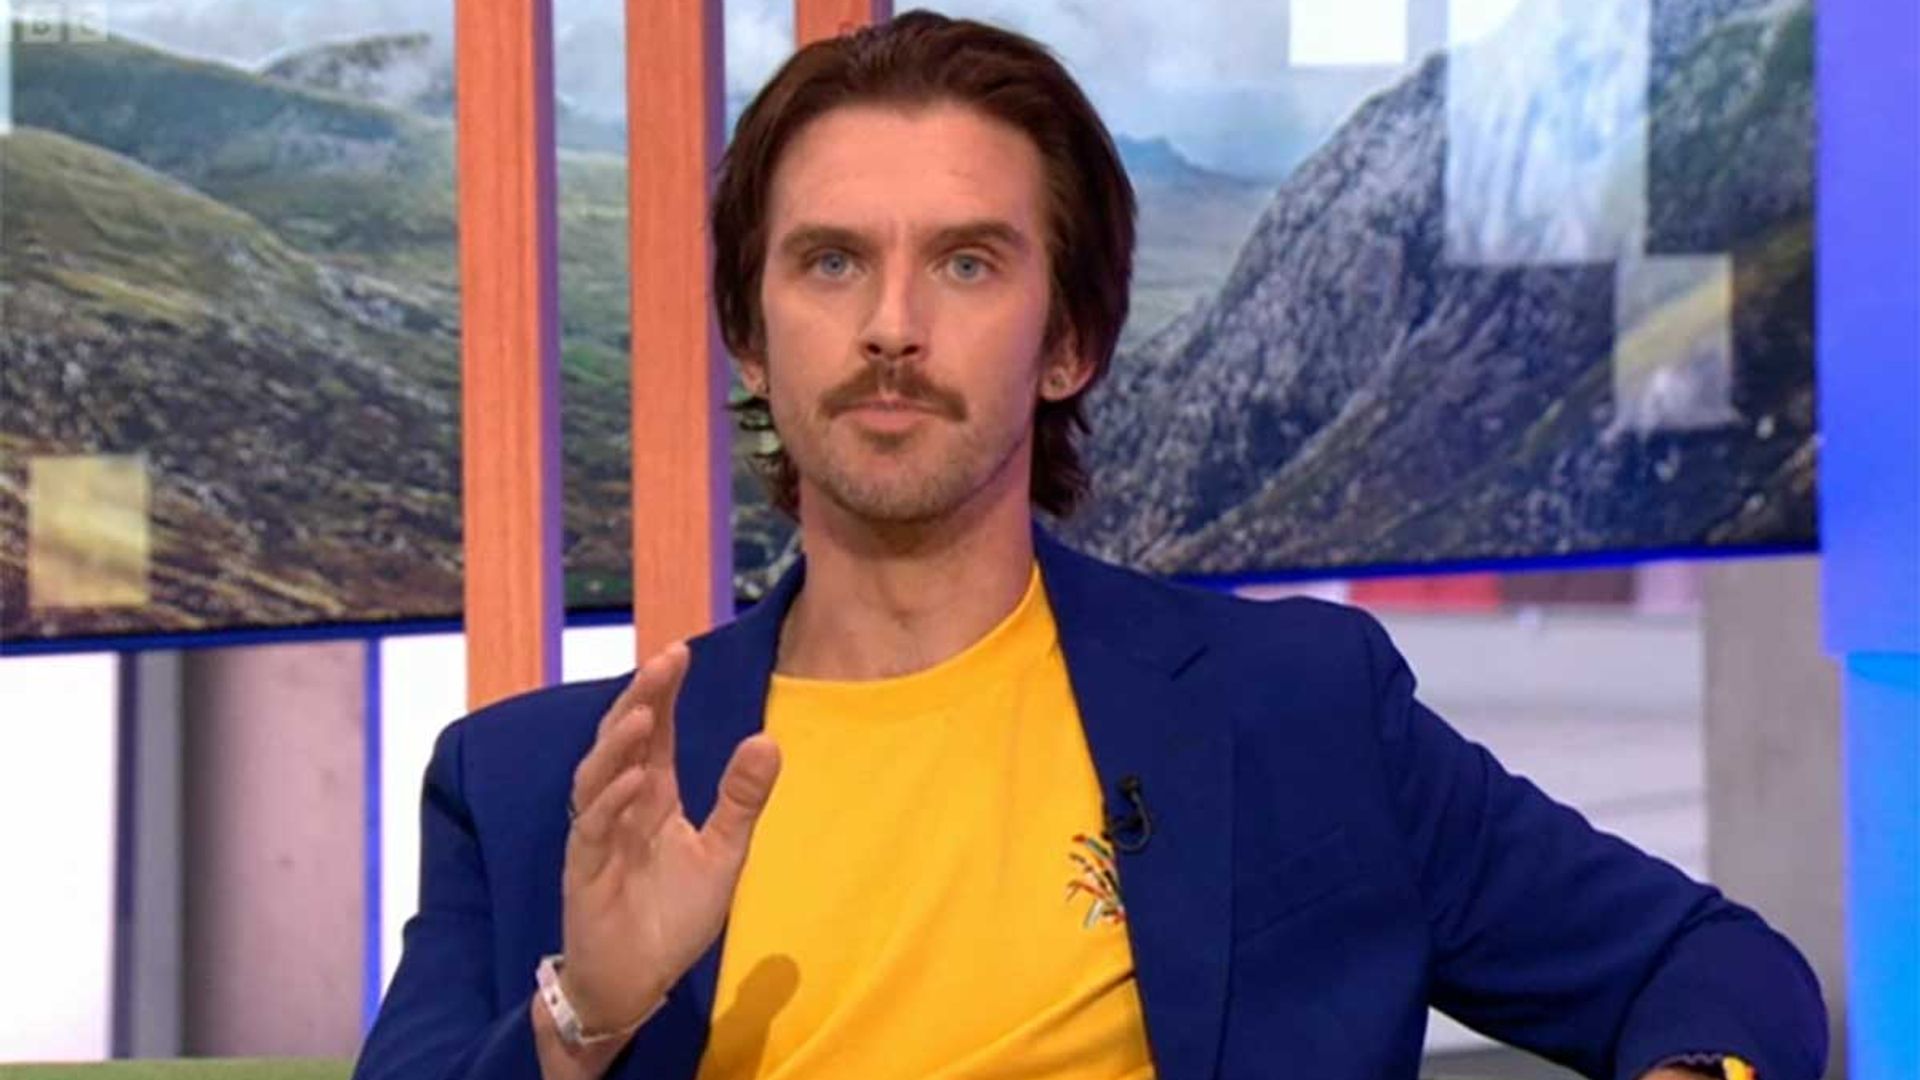 Dan Stevens receives gasps from studio after scathing comment on The One Show - watch